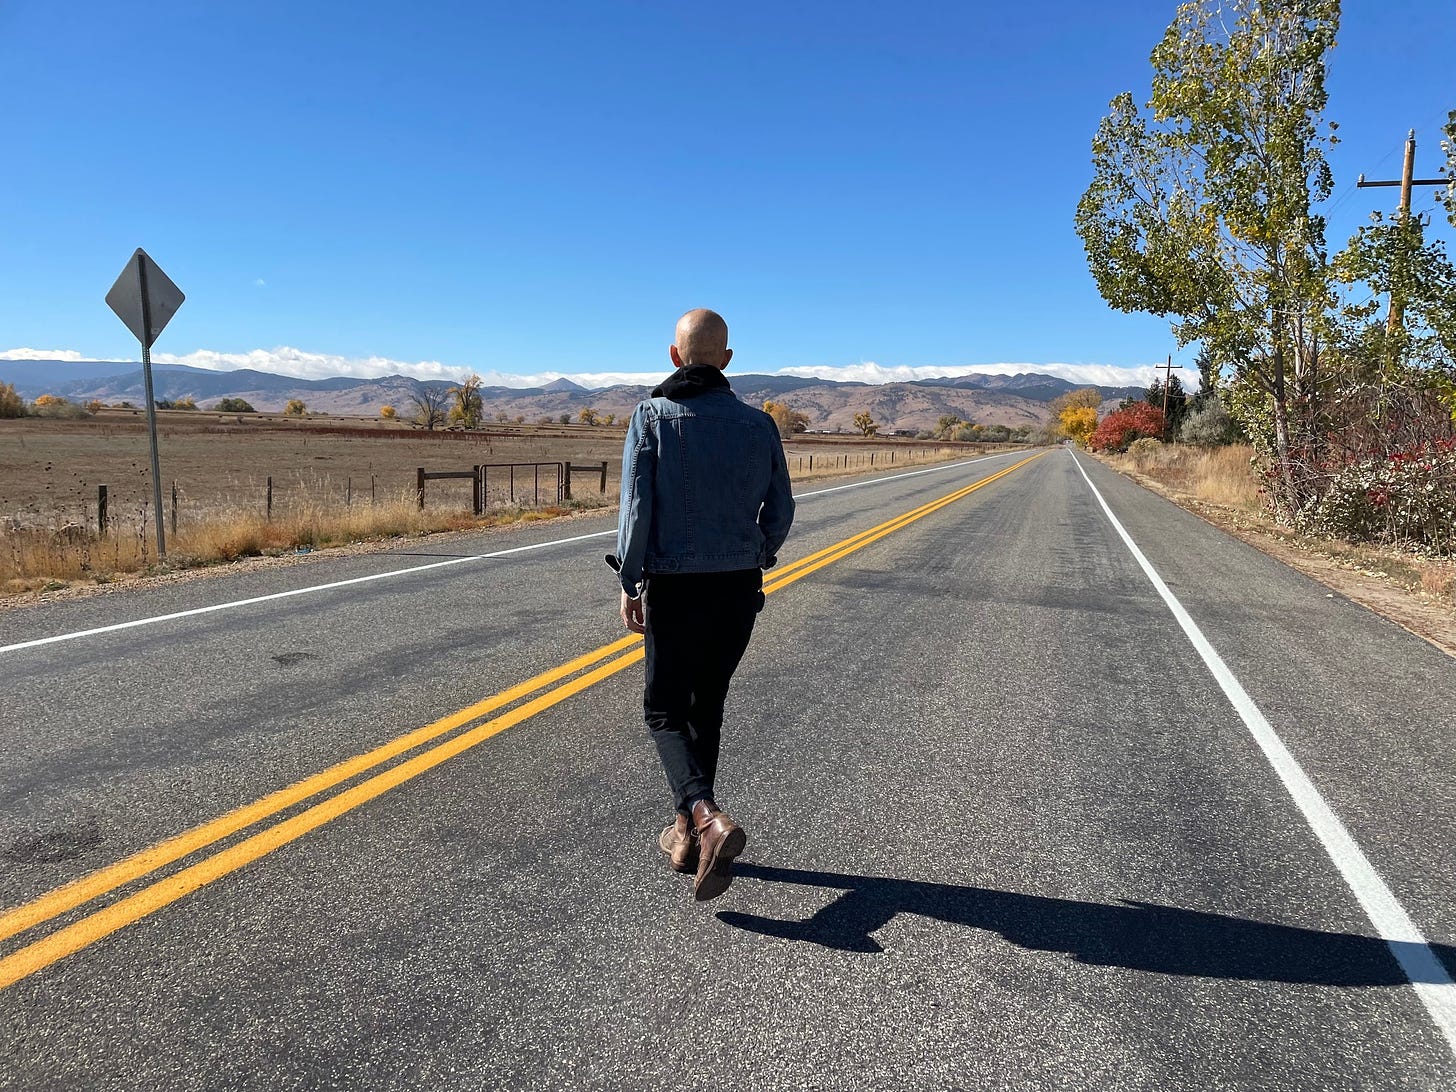 An image of Andrea Gibson on an open road with varied terrain in the background: an open field, orange, green and yellow trees, mountains and clouds in the background, and a bright blue sky. They are looking away from the camera, and there are no cars on the road.